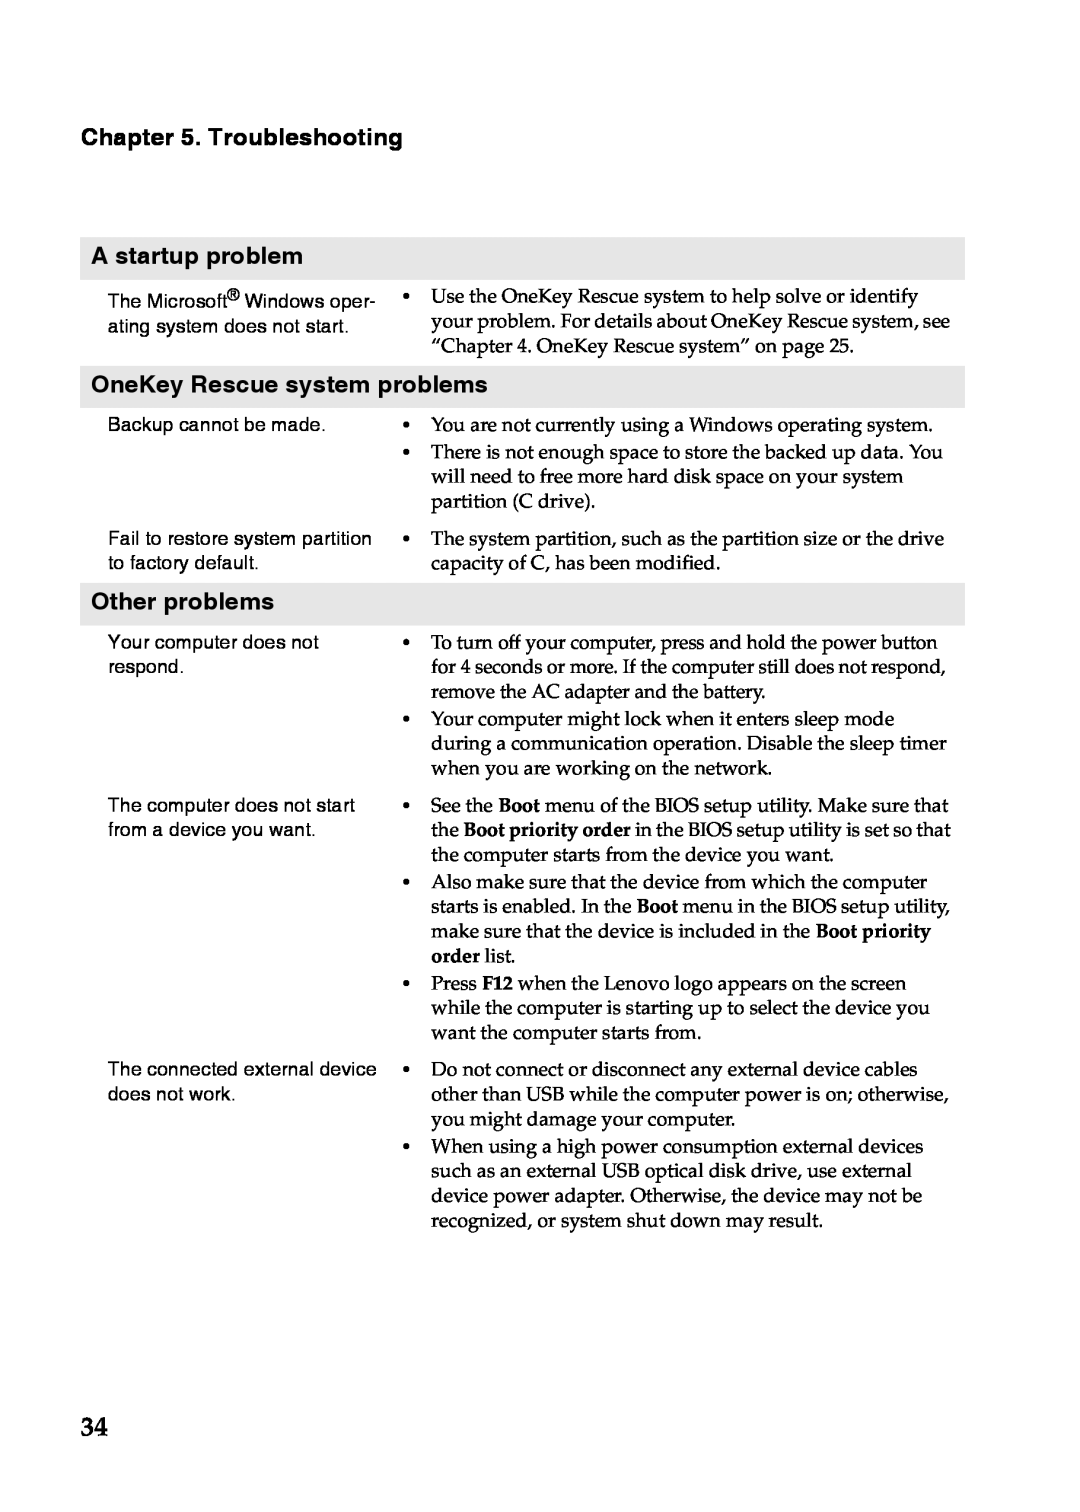 Lenovo S110 manual Troubleshooting A startup problem, OneKey Rescue system problems, Other problems 